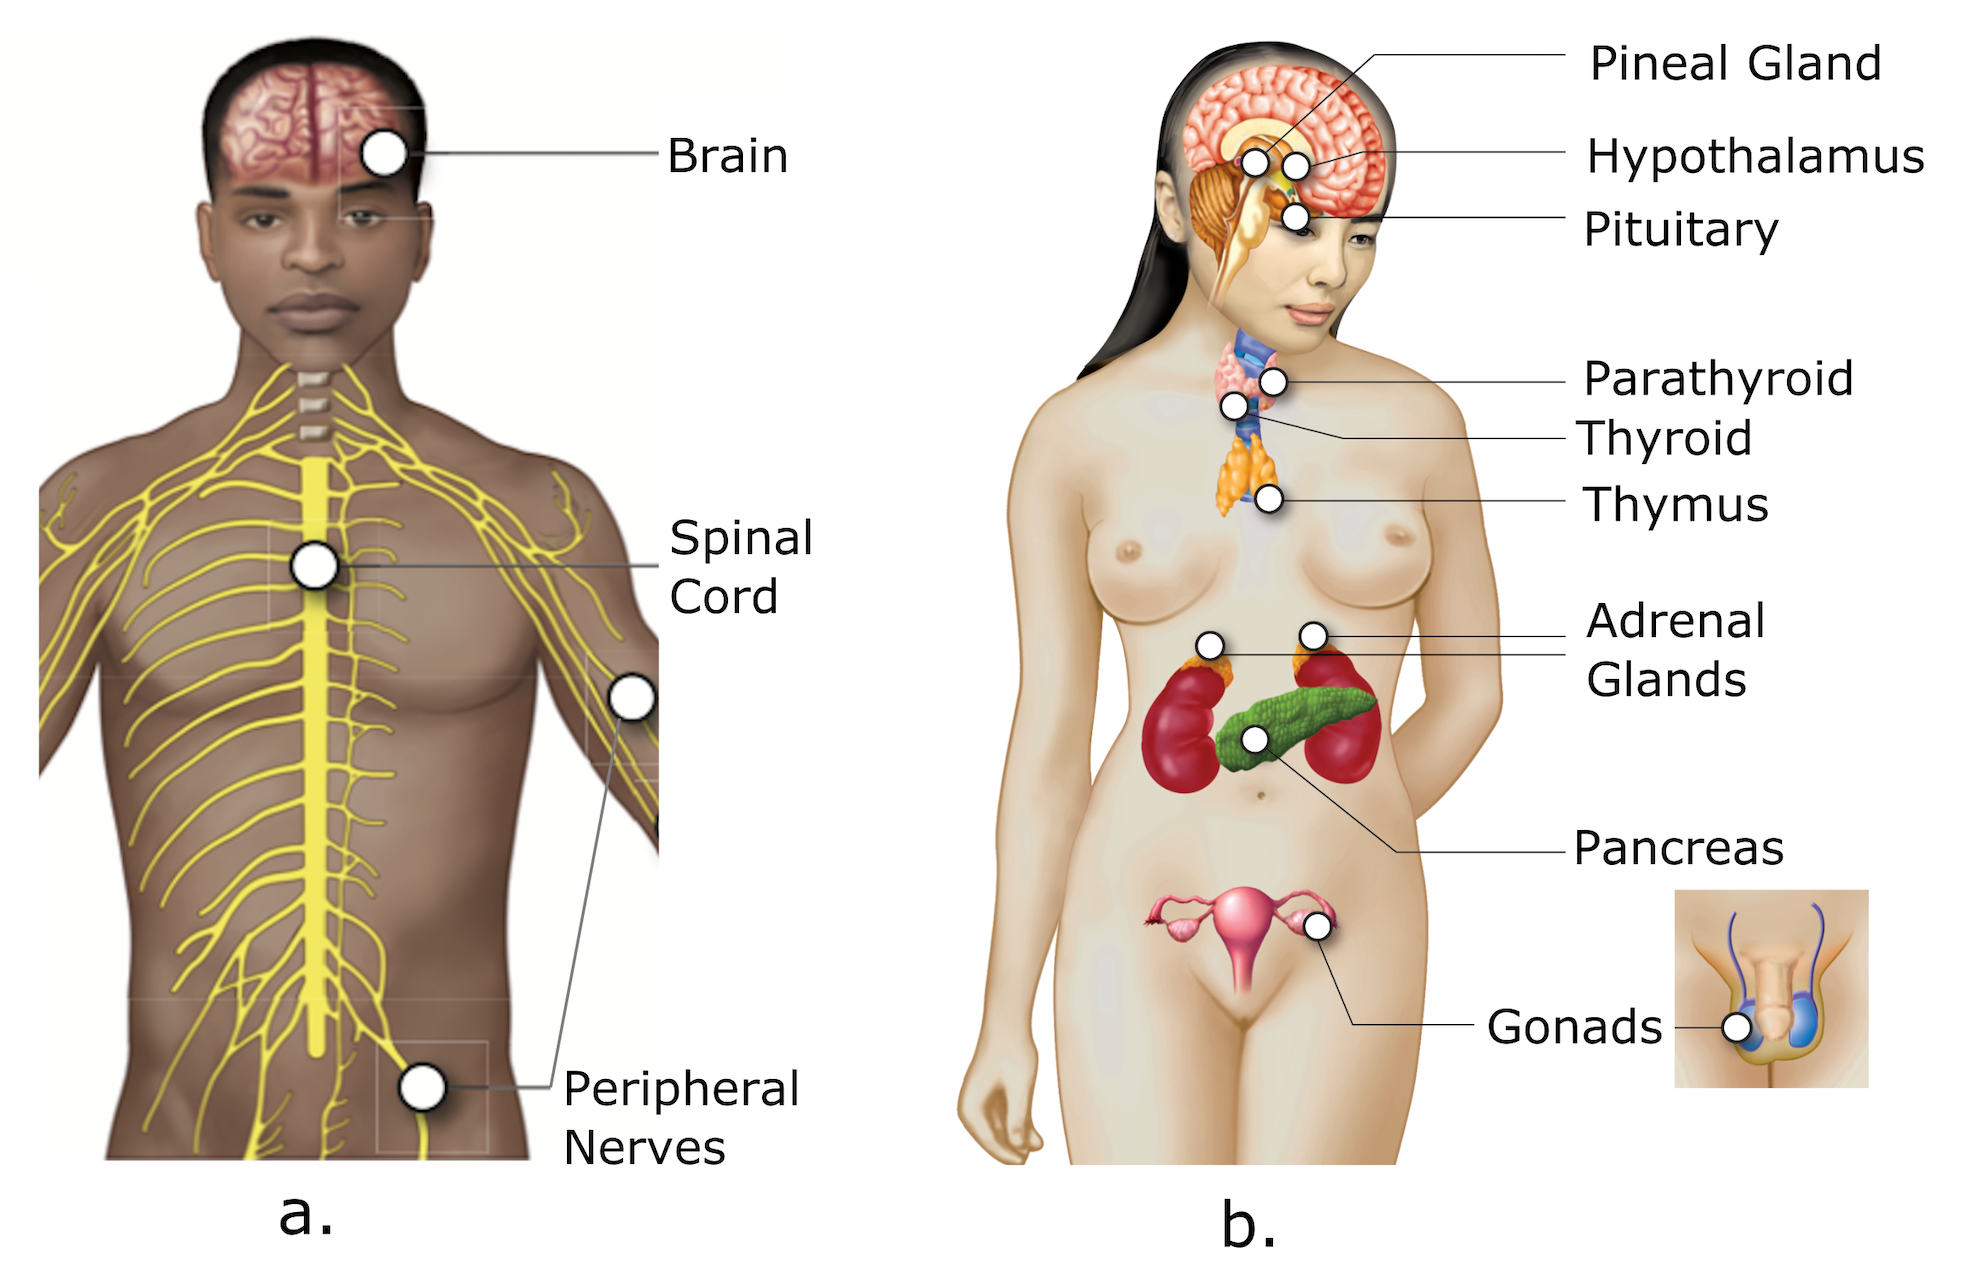 Labeled drawings of the nervous and endocrine systems